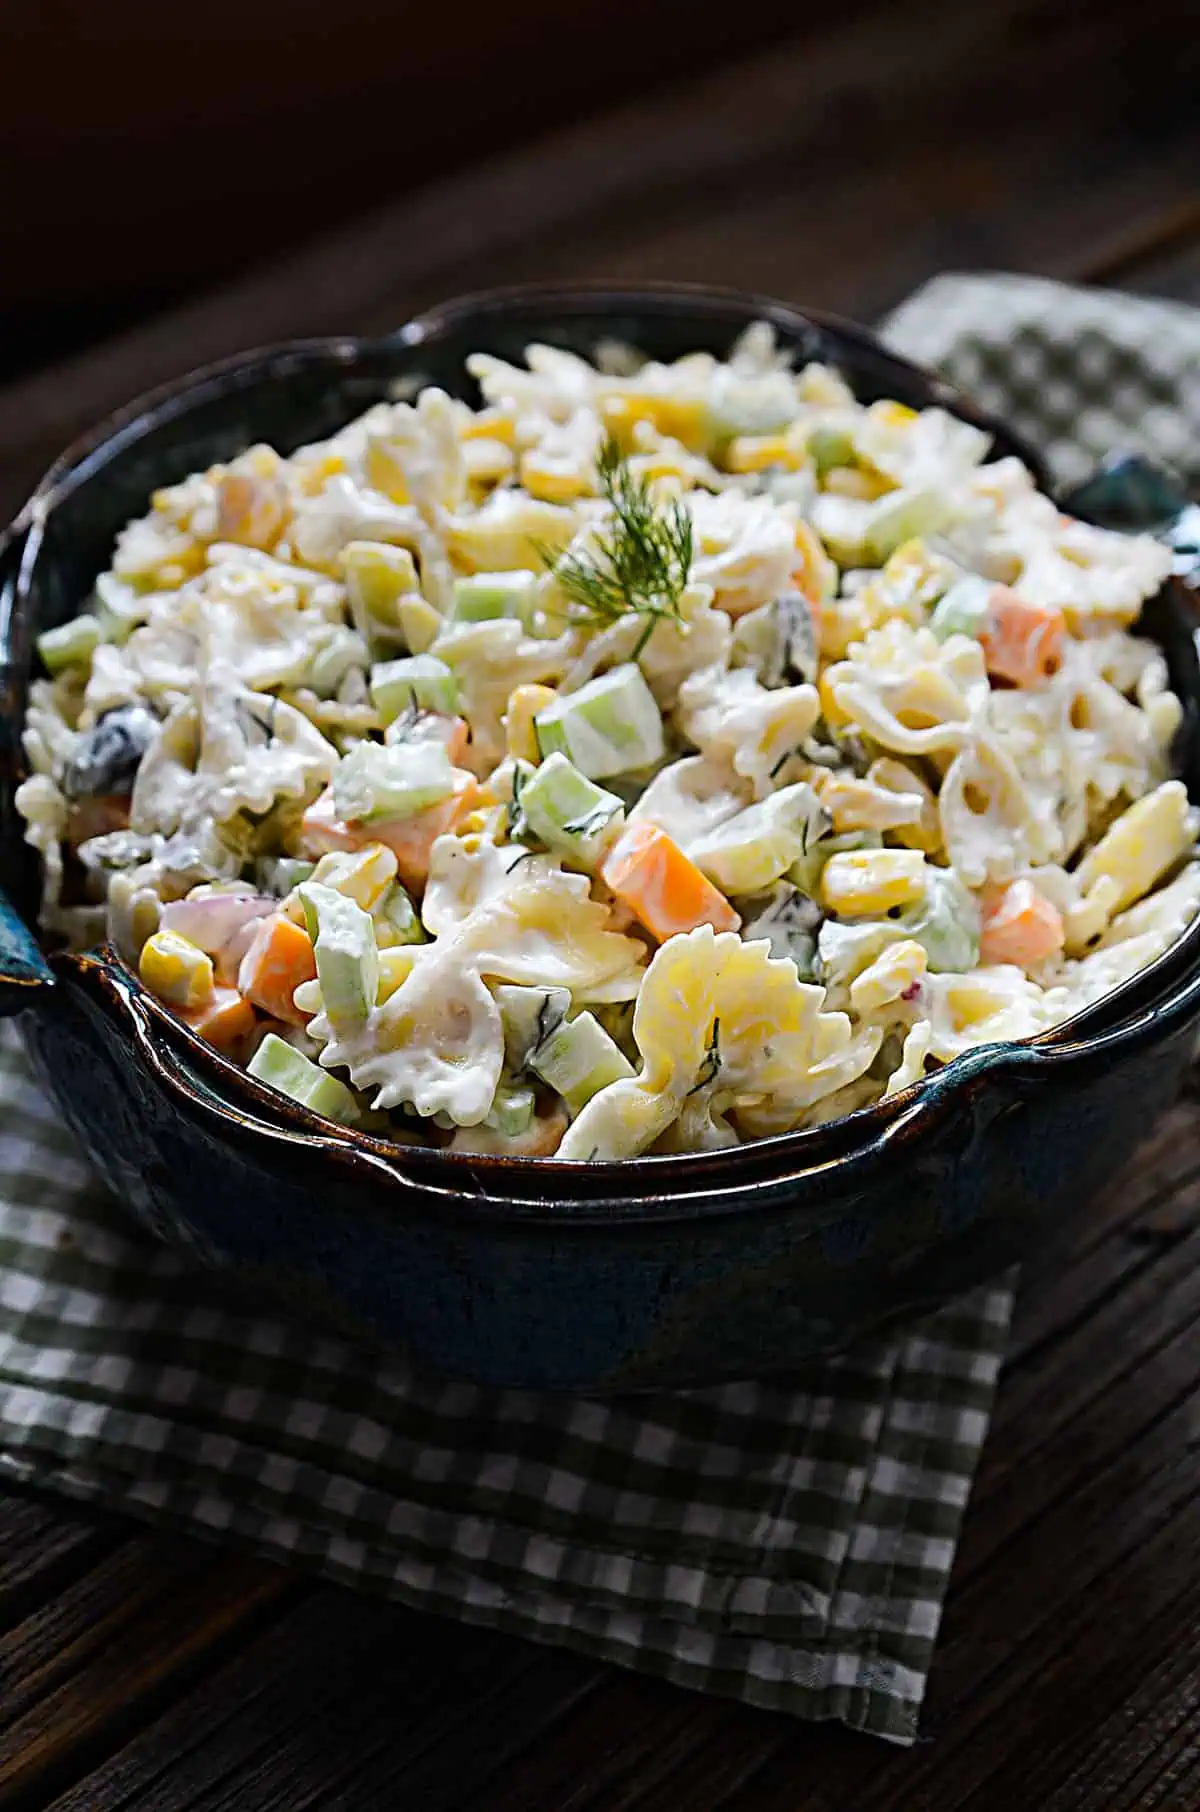 Bowtie pasta salad with veggies in a bowl. 